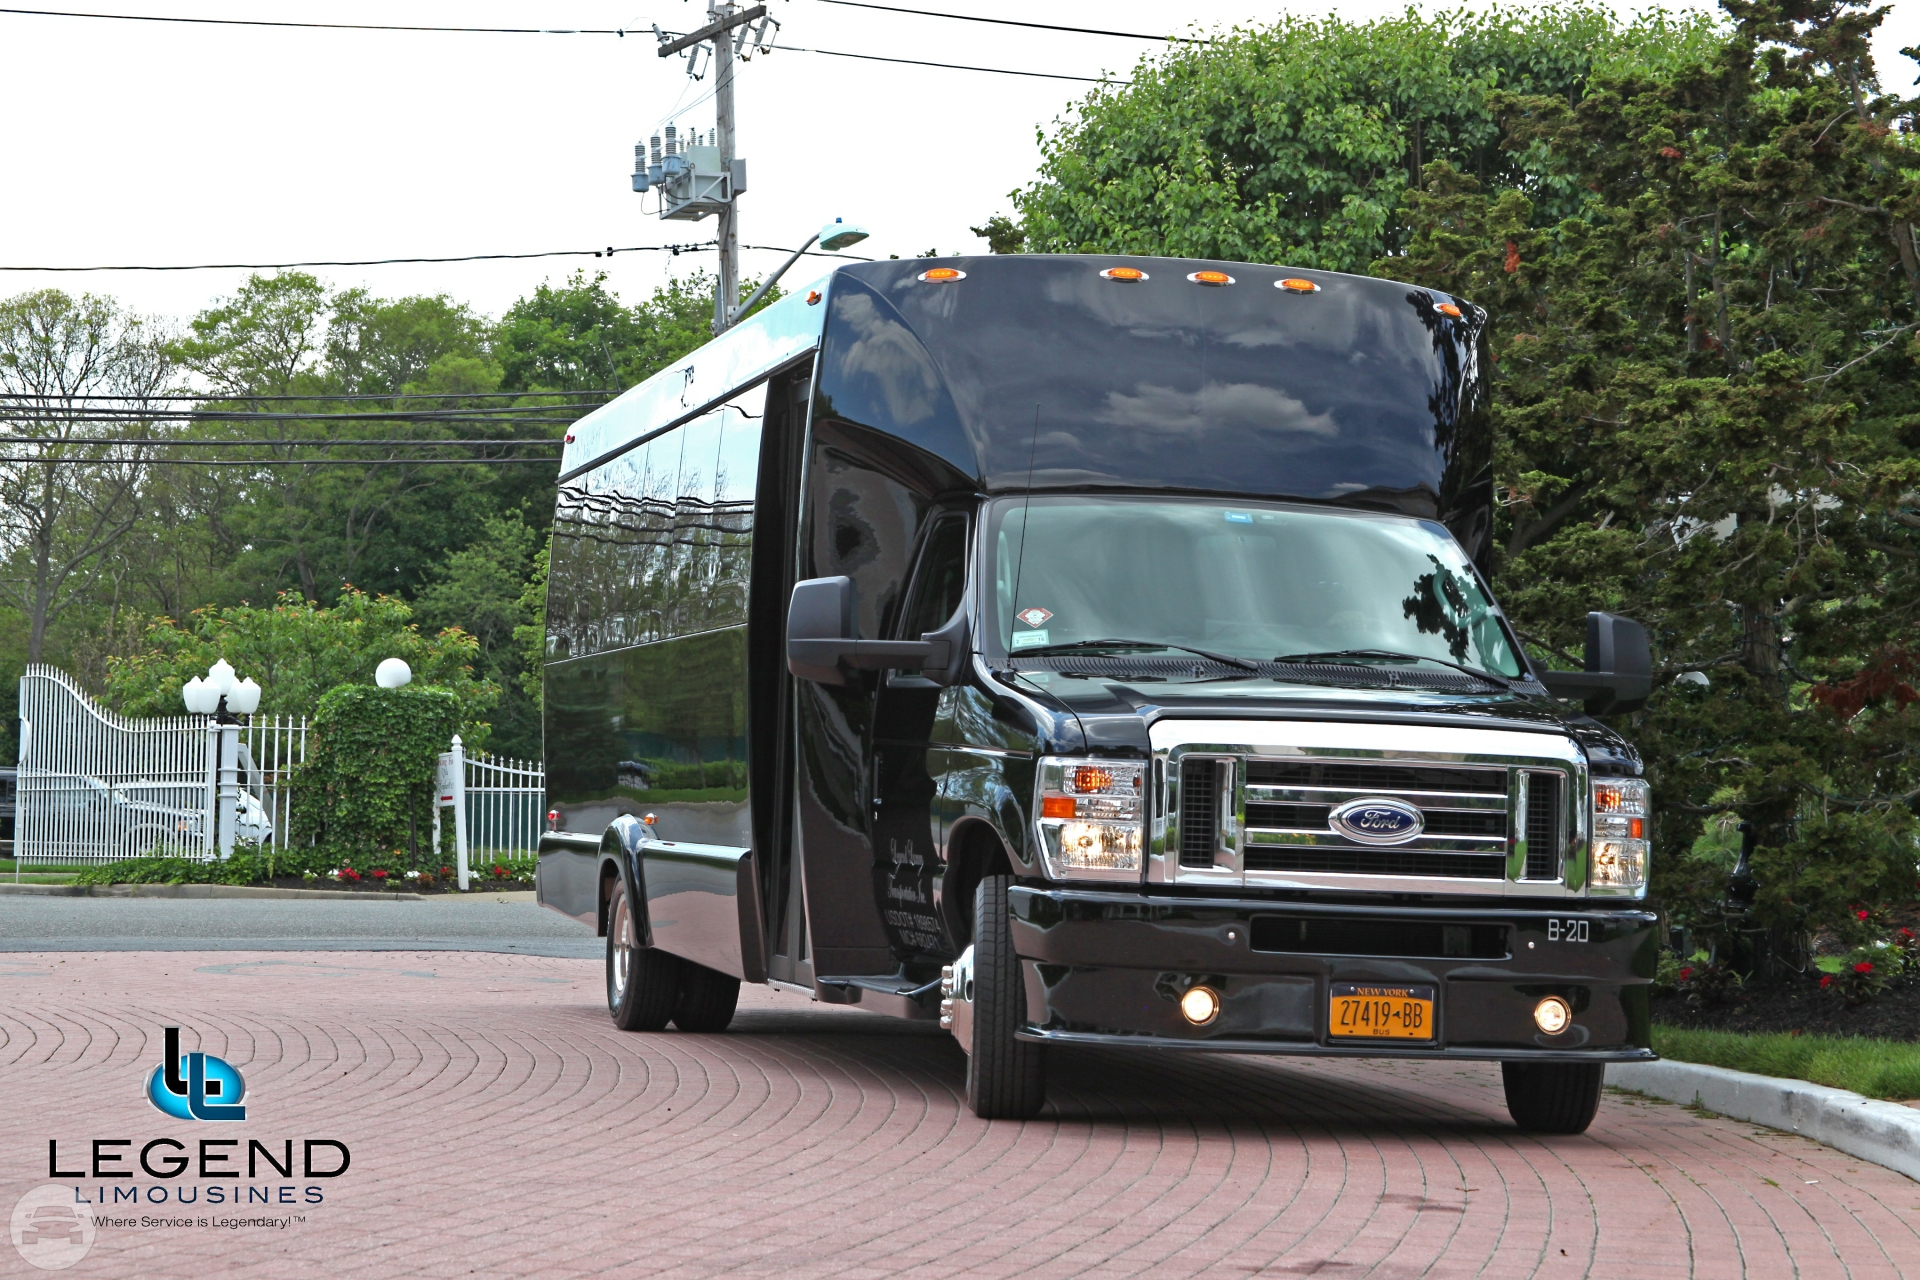 2016 Mack Edition 20 Passenger Black Party Bus
Party Limo Bus /
New York, NY

 / Hourly $0.00
